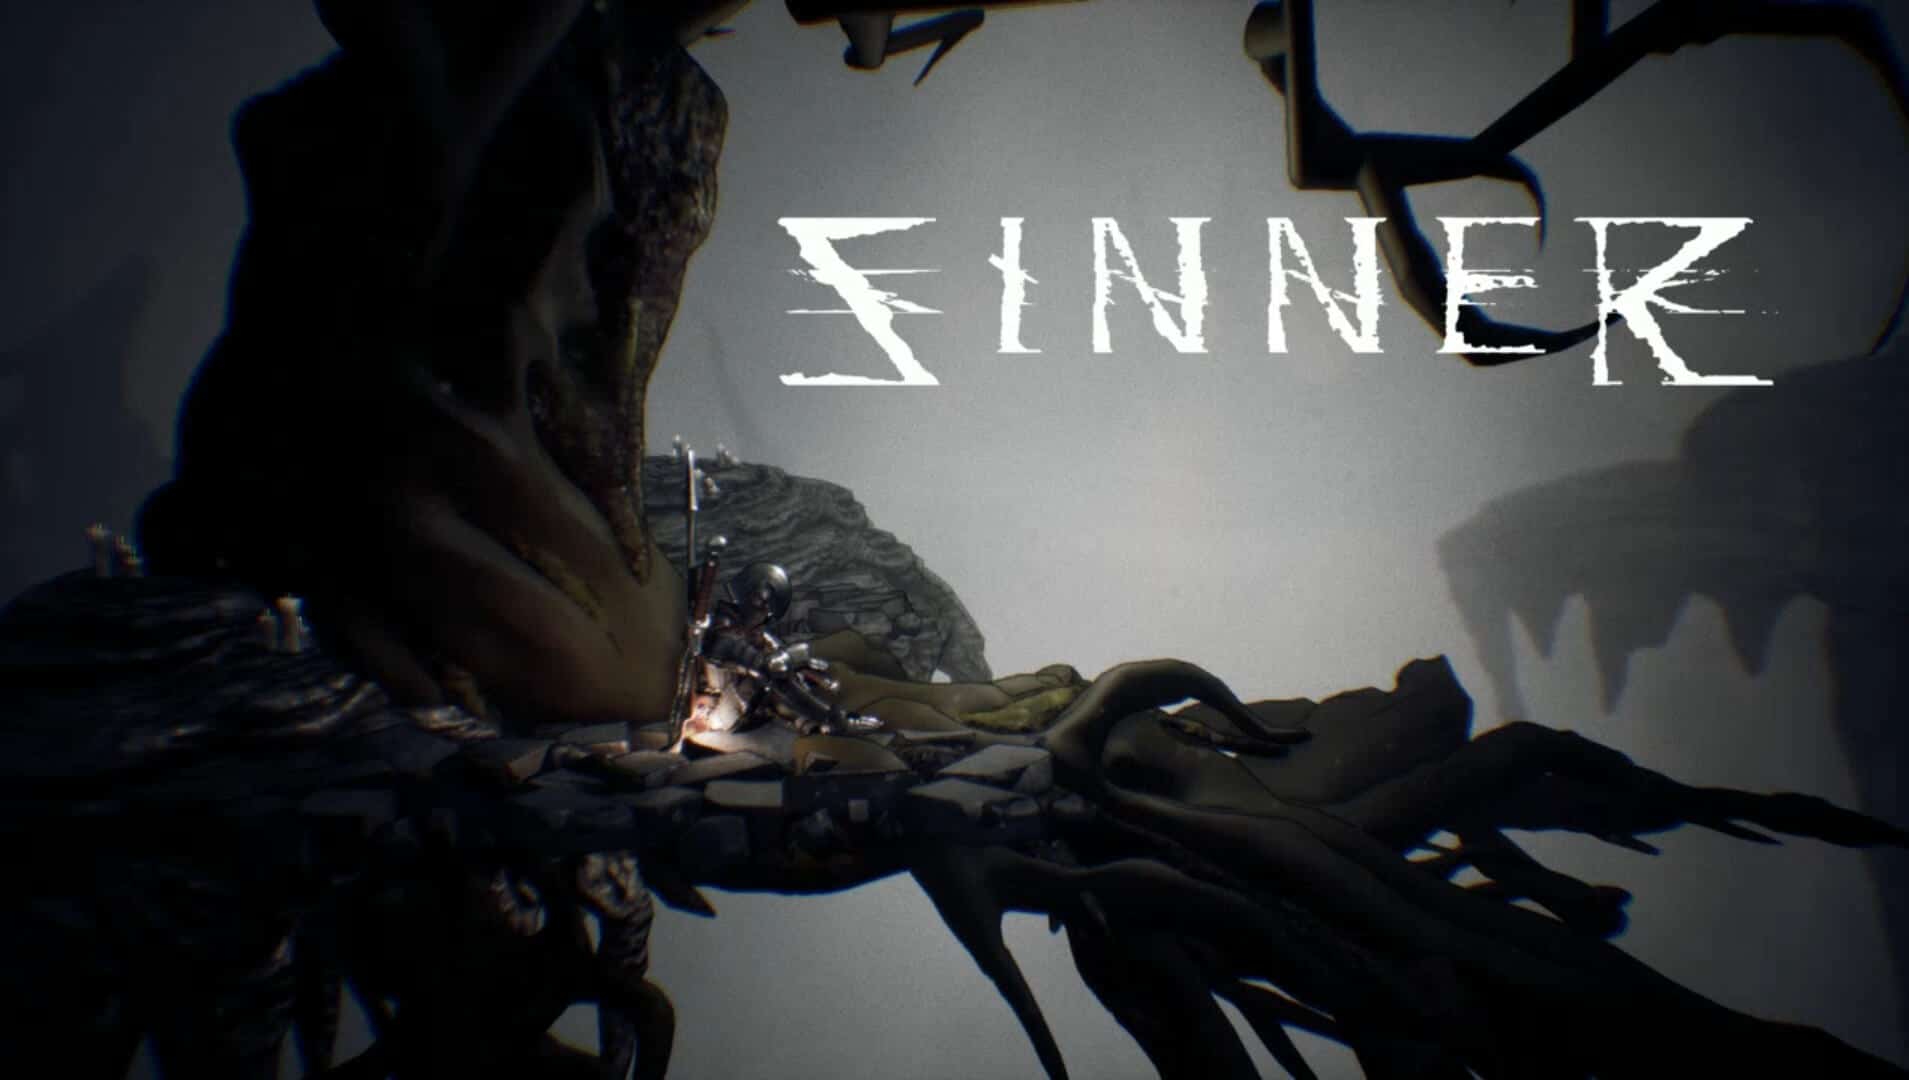 Sinner: Sacrifice for Redemption is coming